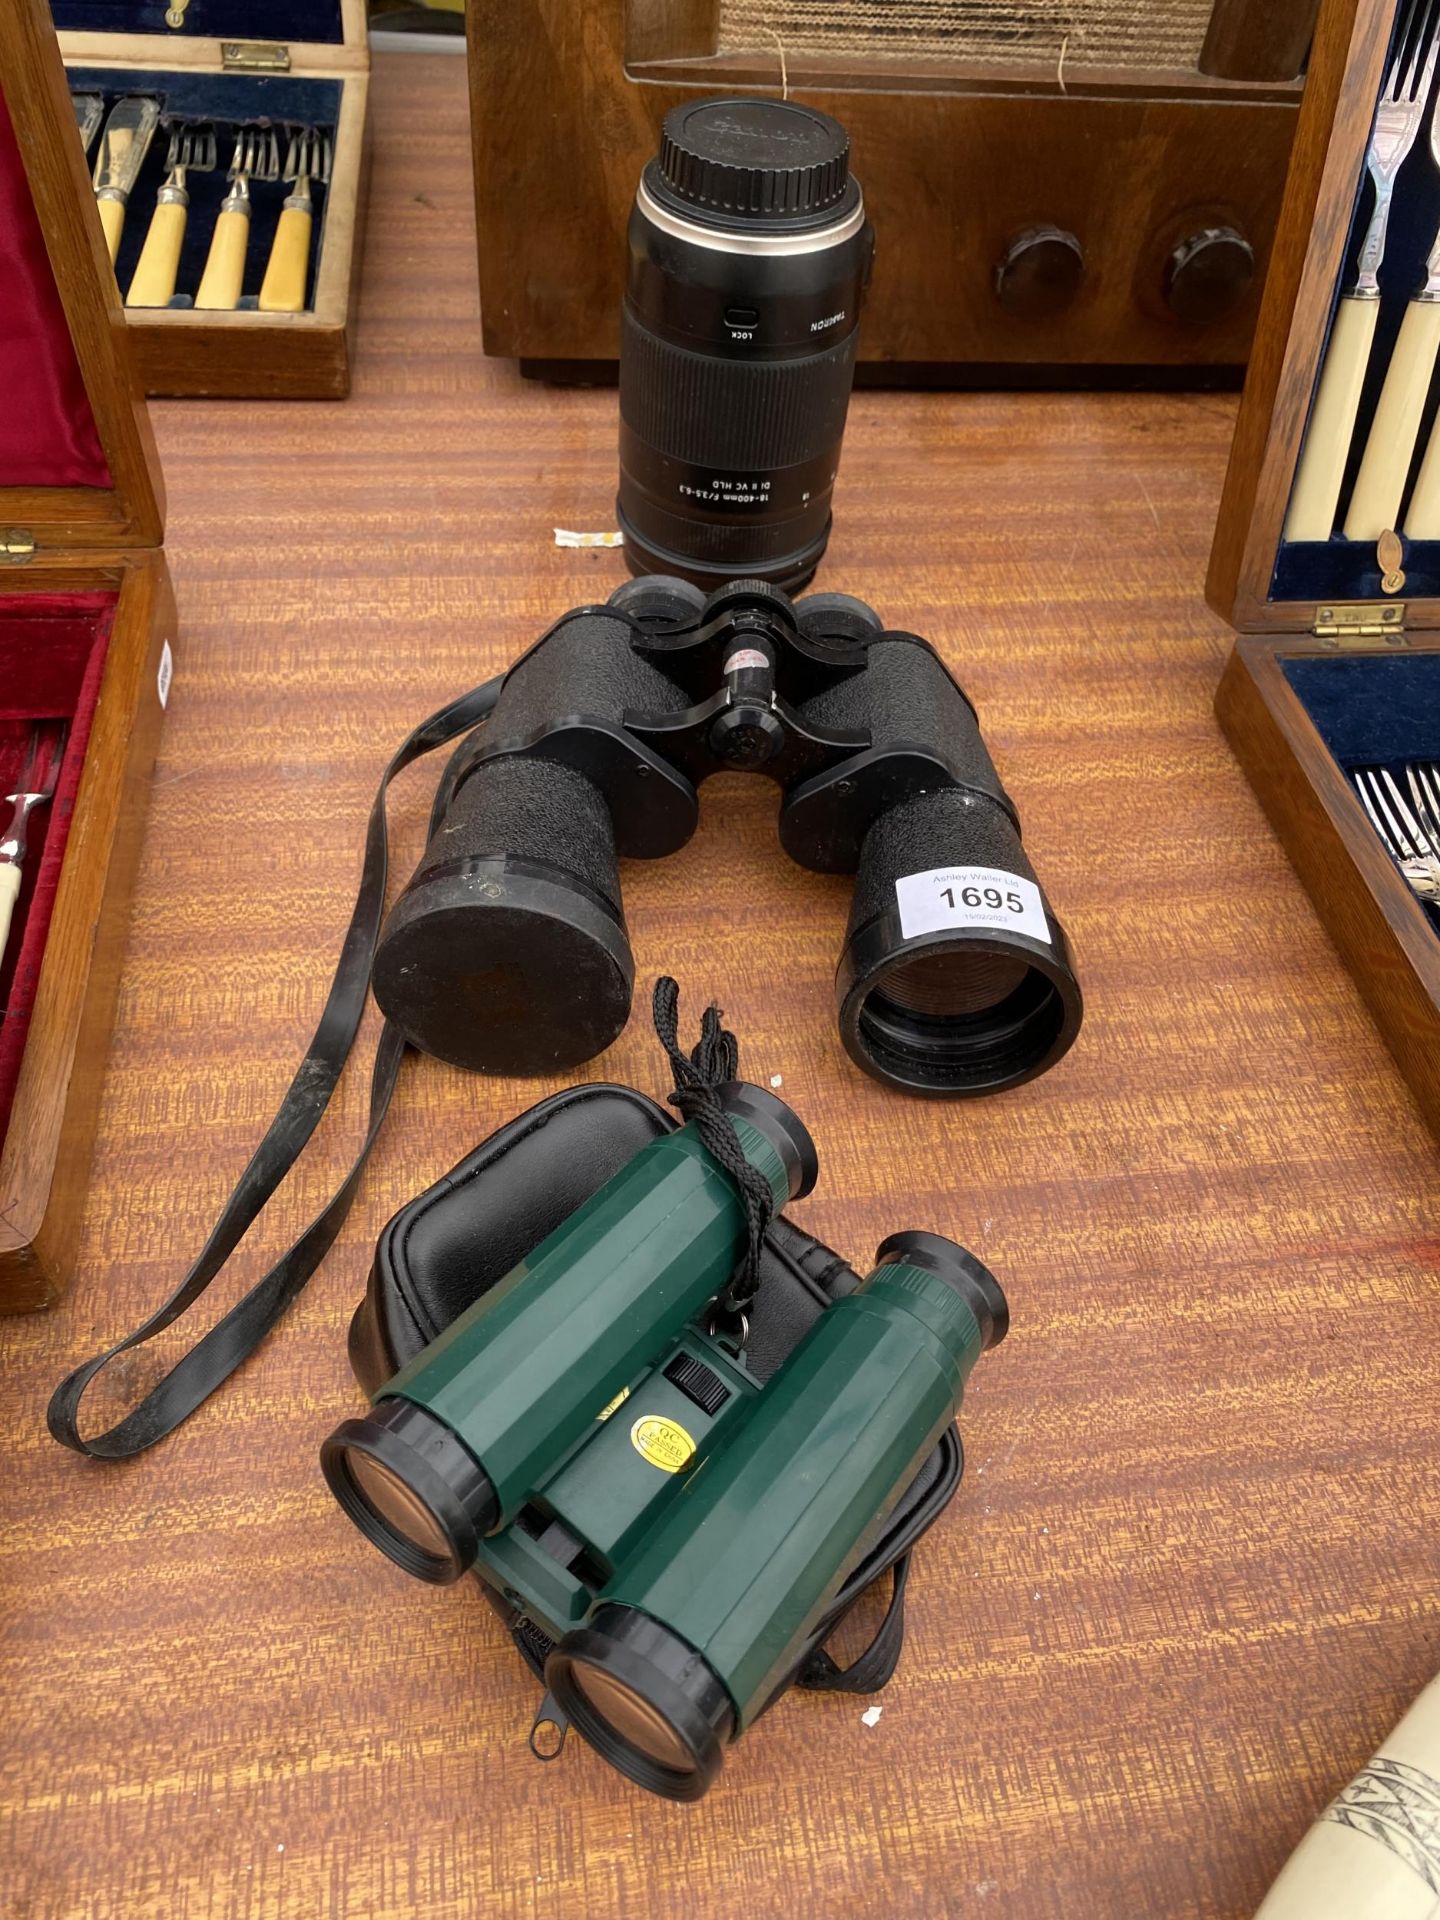 A PAIR OF HANIMEX BINOCULARS, A CANON TAMRON CAMERA LENS AND A FURTHER PAIR OF BINOCULARS